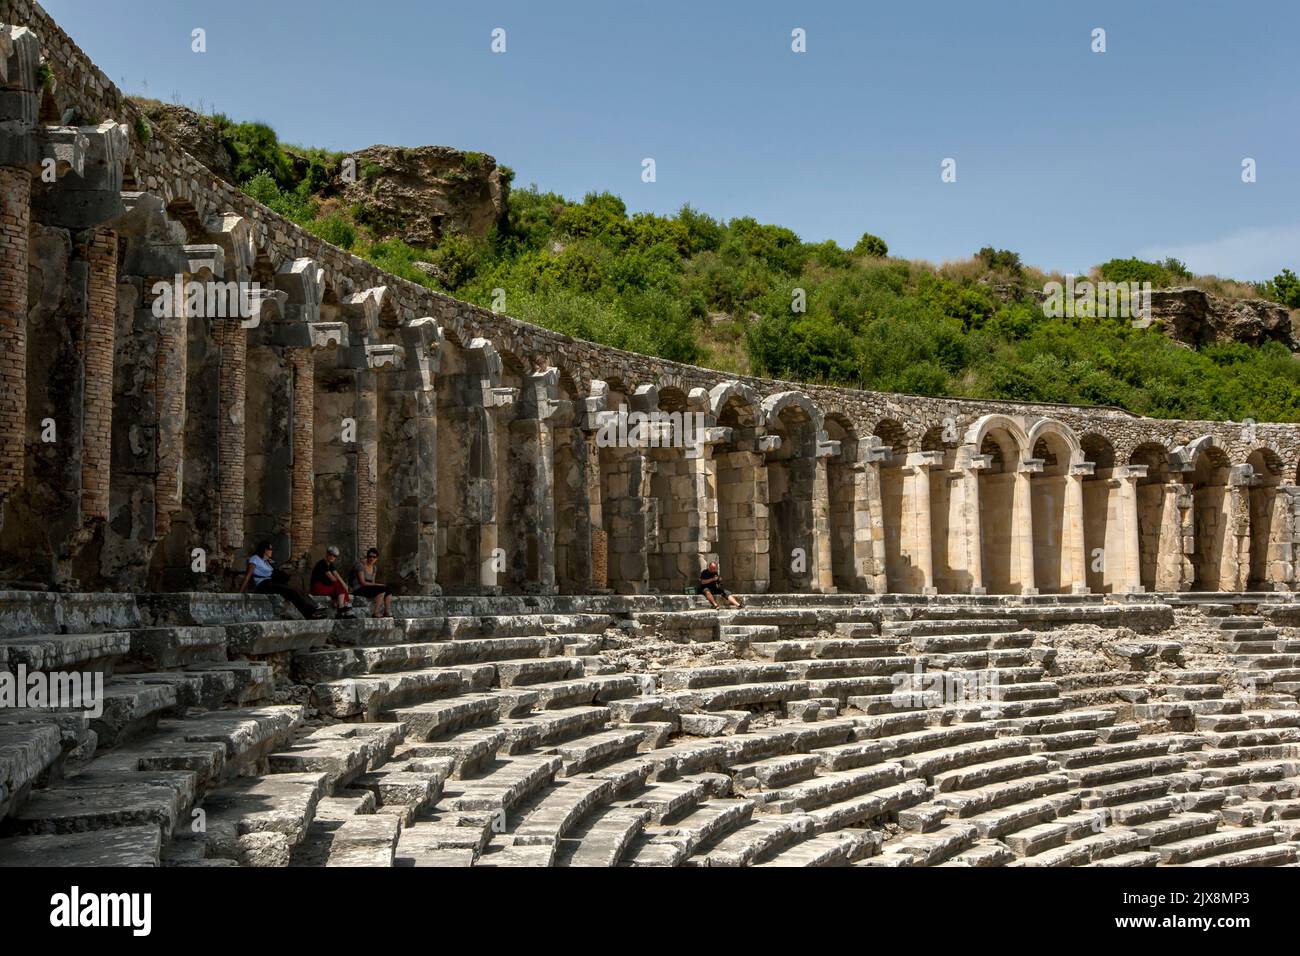 A section of the magnificent Roman theatre at the ancient city of Aspendos in the Province of Antalya in Turkey. Stock Photo